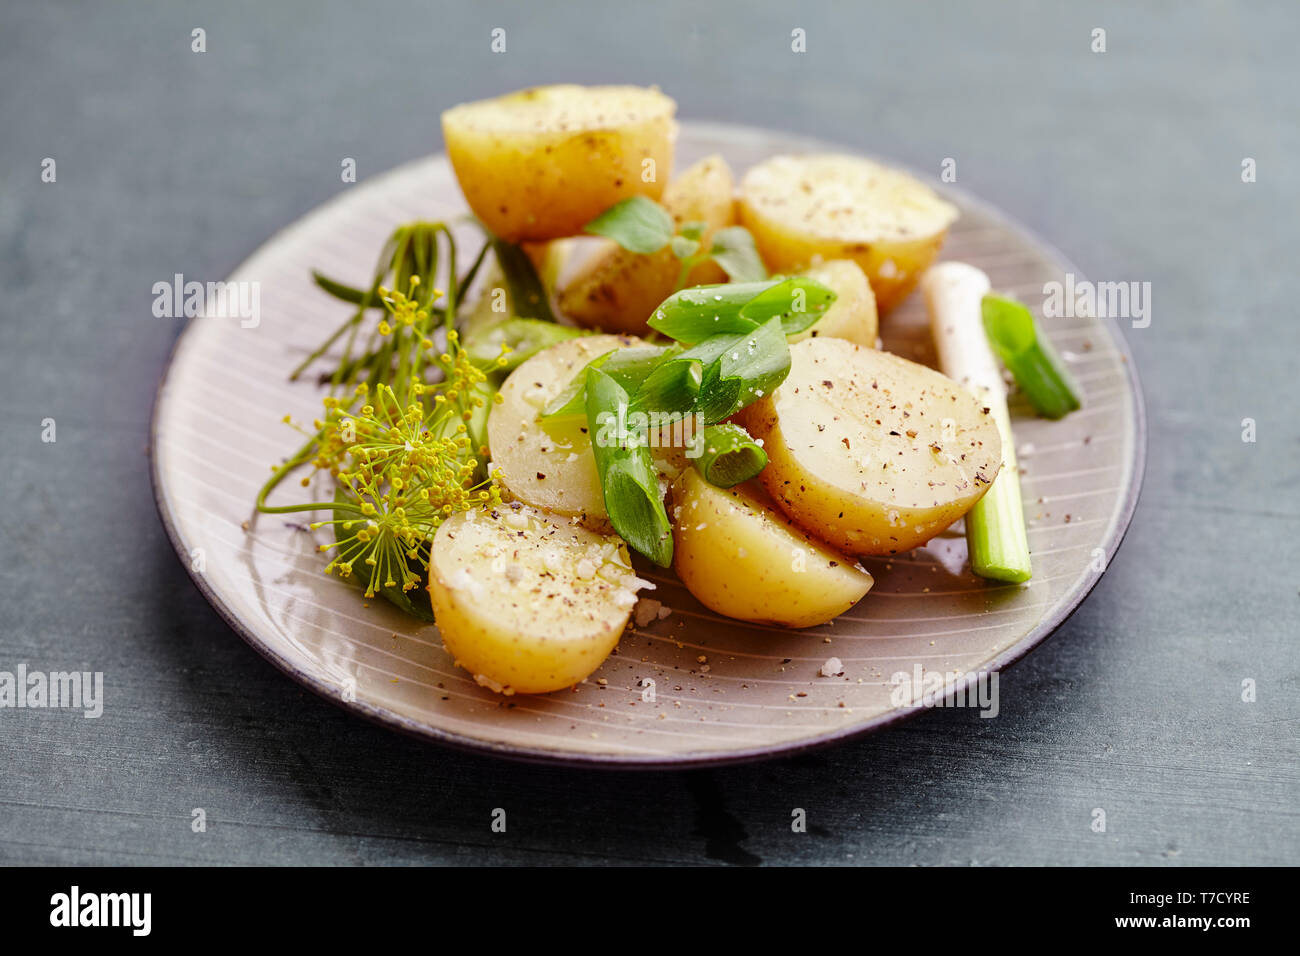 potato salad with dild,spring oniens, olive oil, salt and pepper Stock Photo